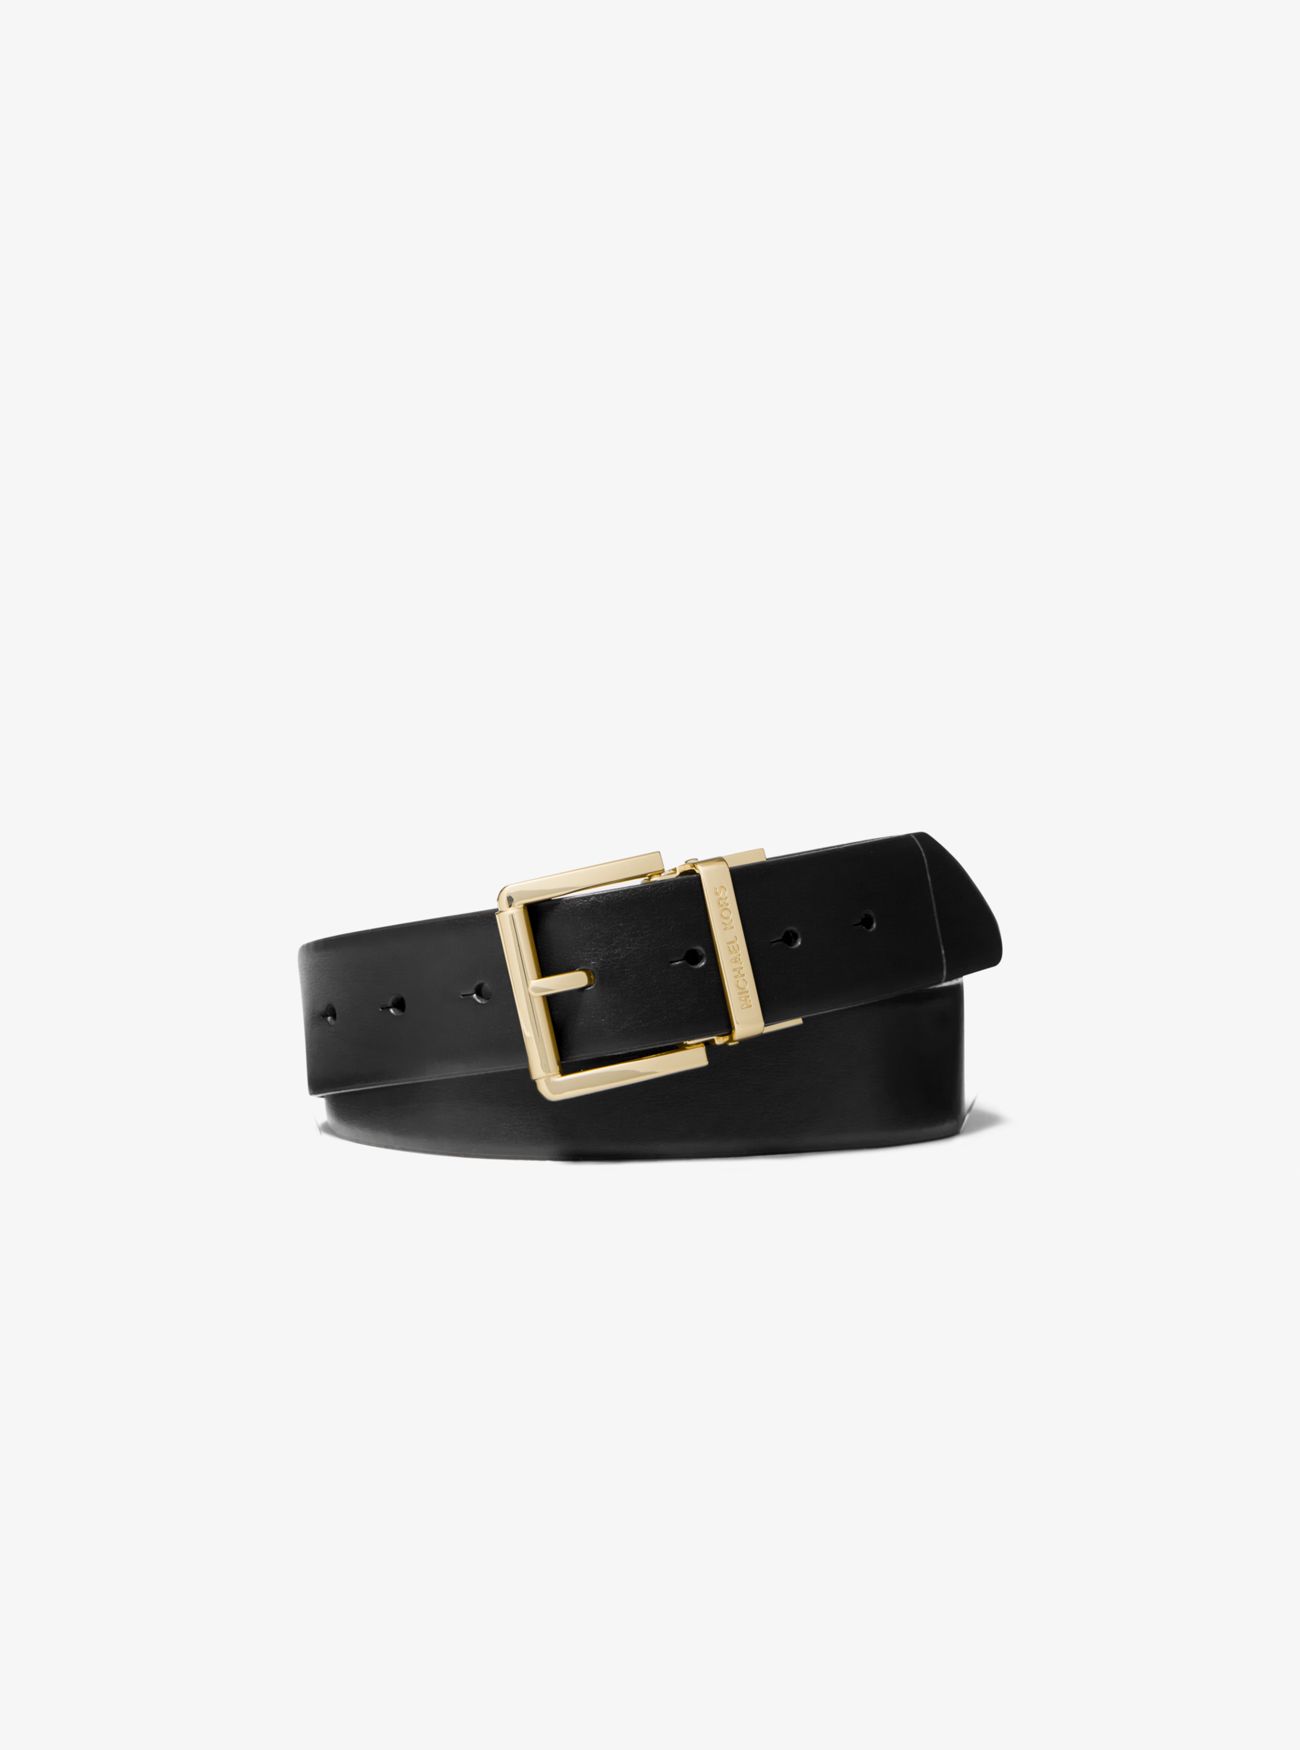 558517-0001 A$ 309.00 SOLD OUT Our belt set is an ideal gift for the ...